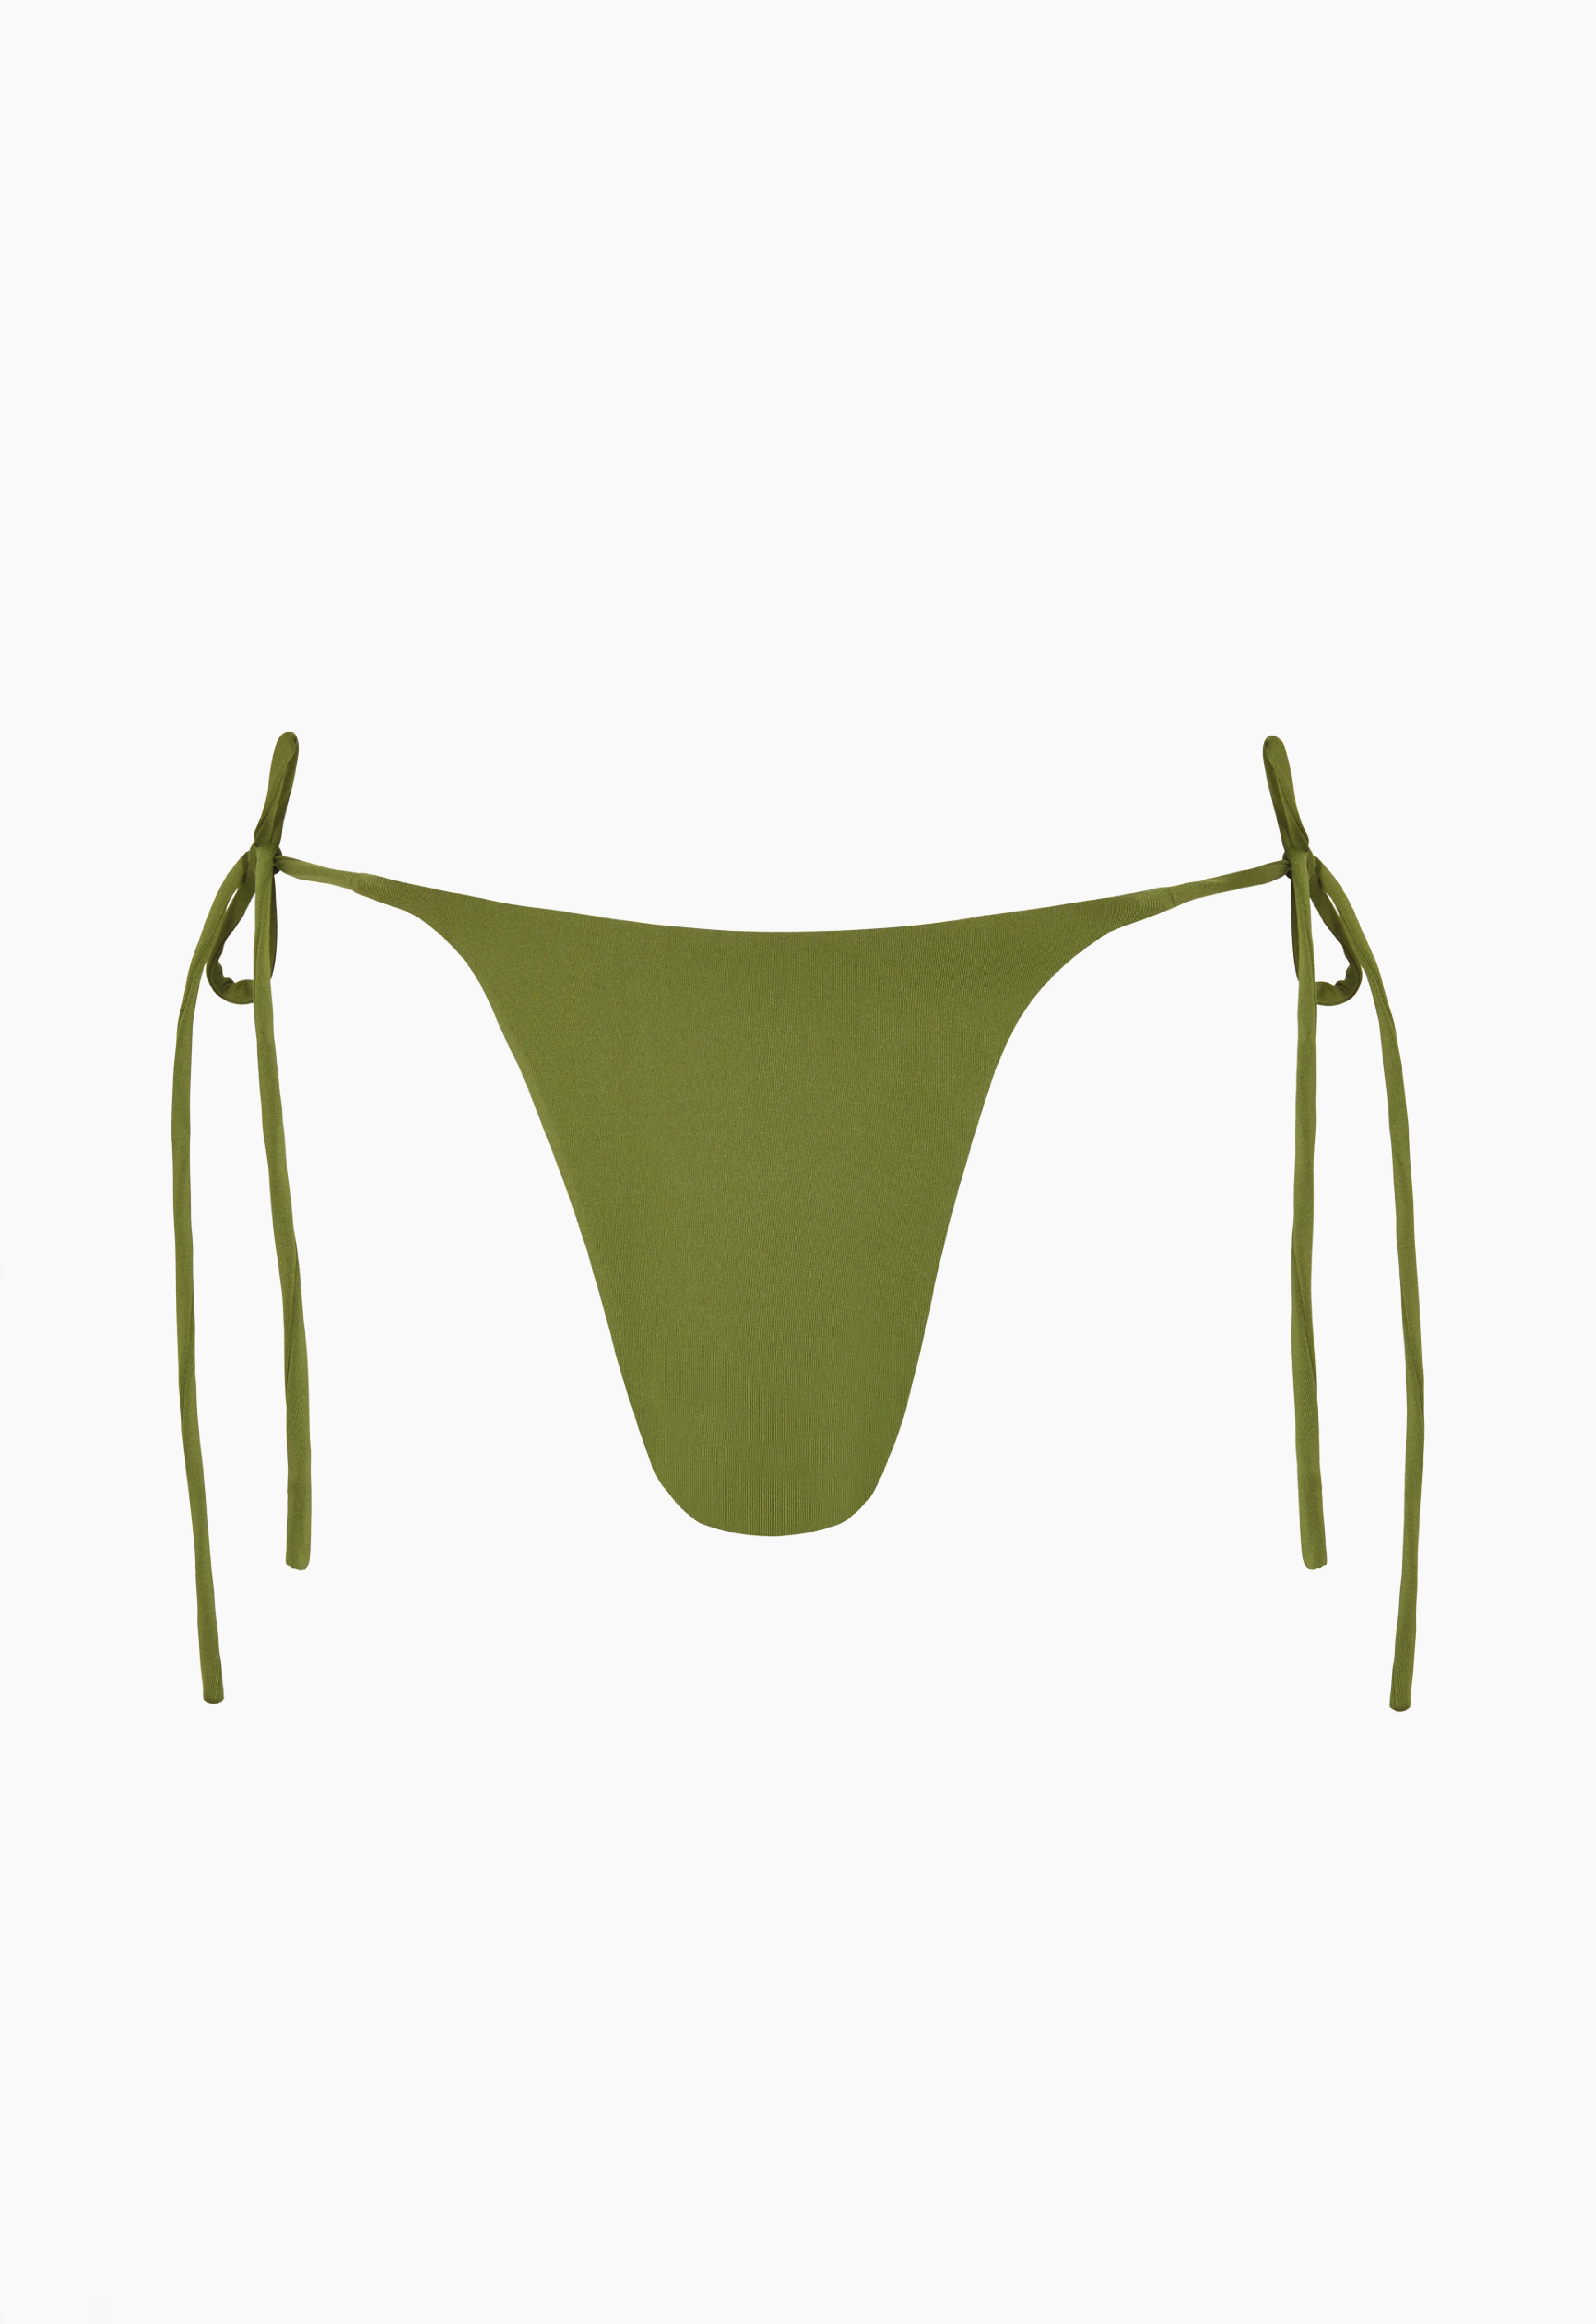 Aexae, Tyra Tie Side Bottoms, Army Green 